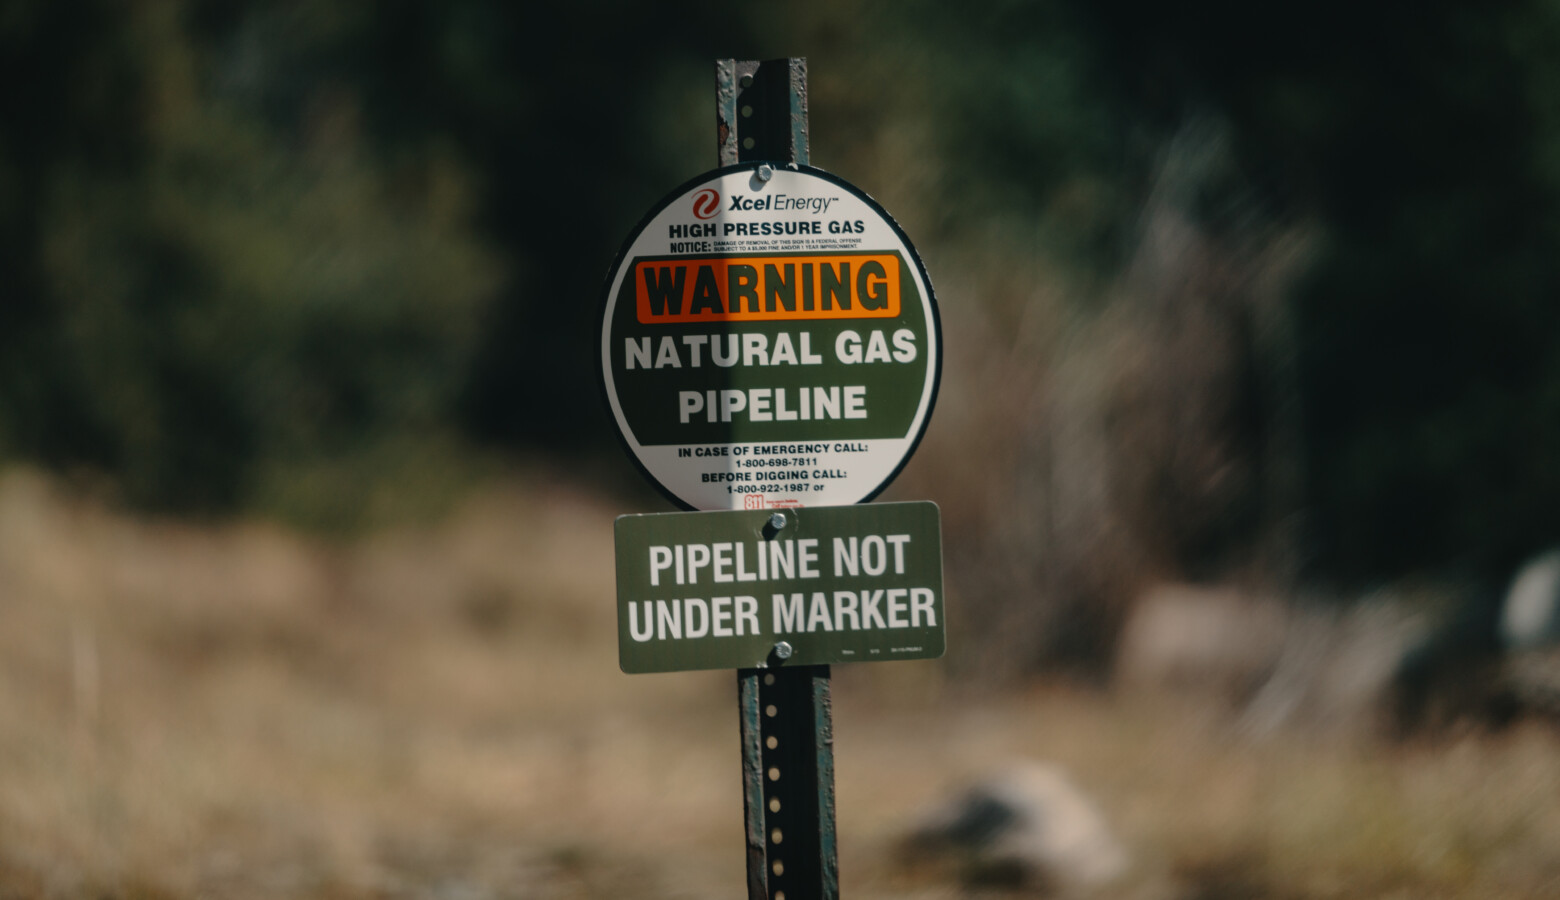 A sign for an Xcel Energy natural gas pipeline buried underground in Colorado, 2018. (Tony Webster/Flickr)